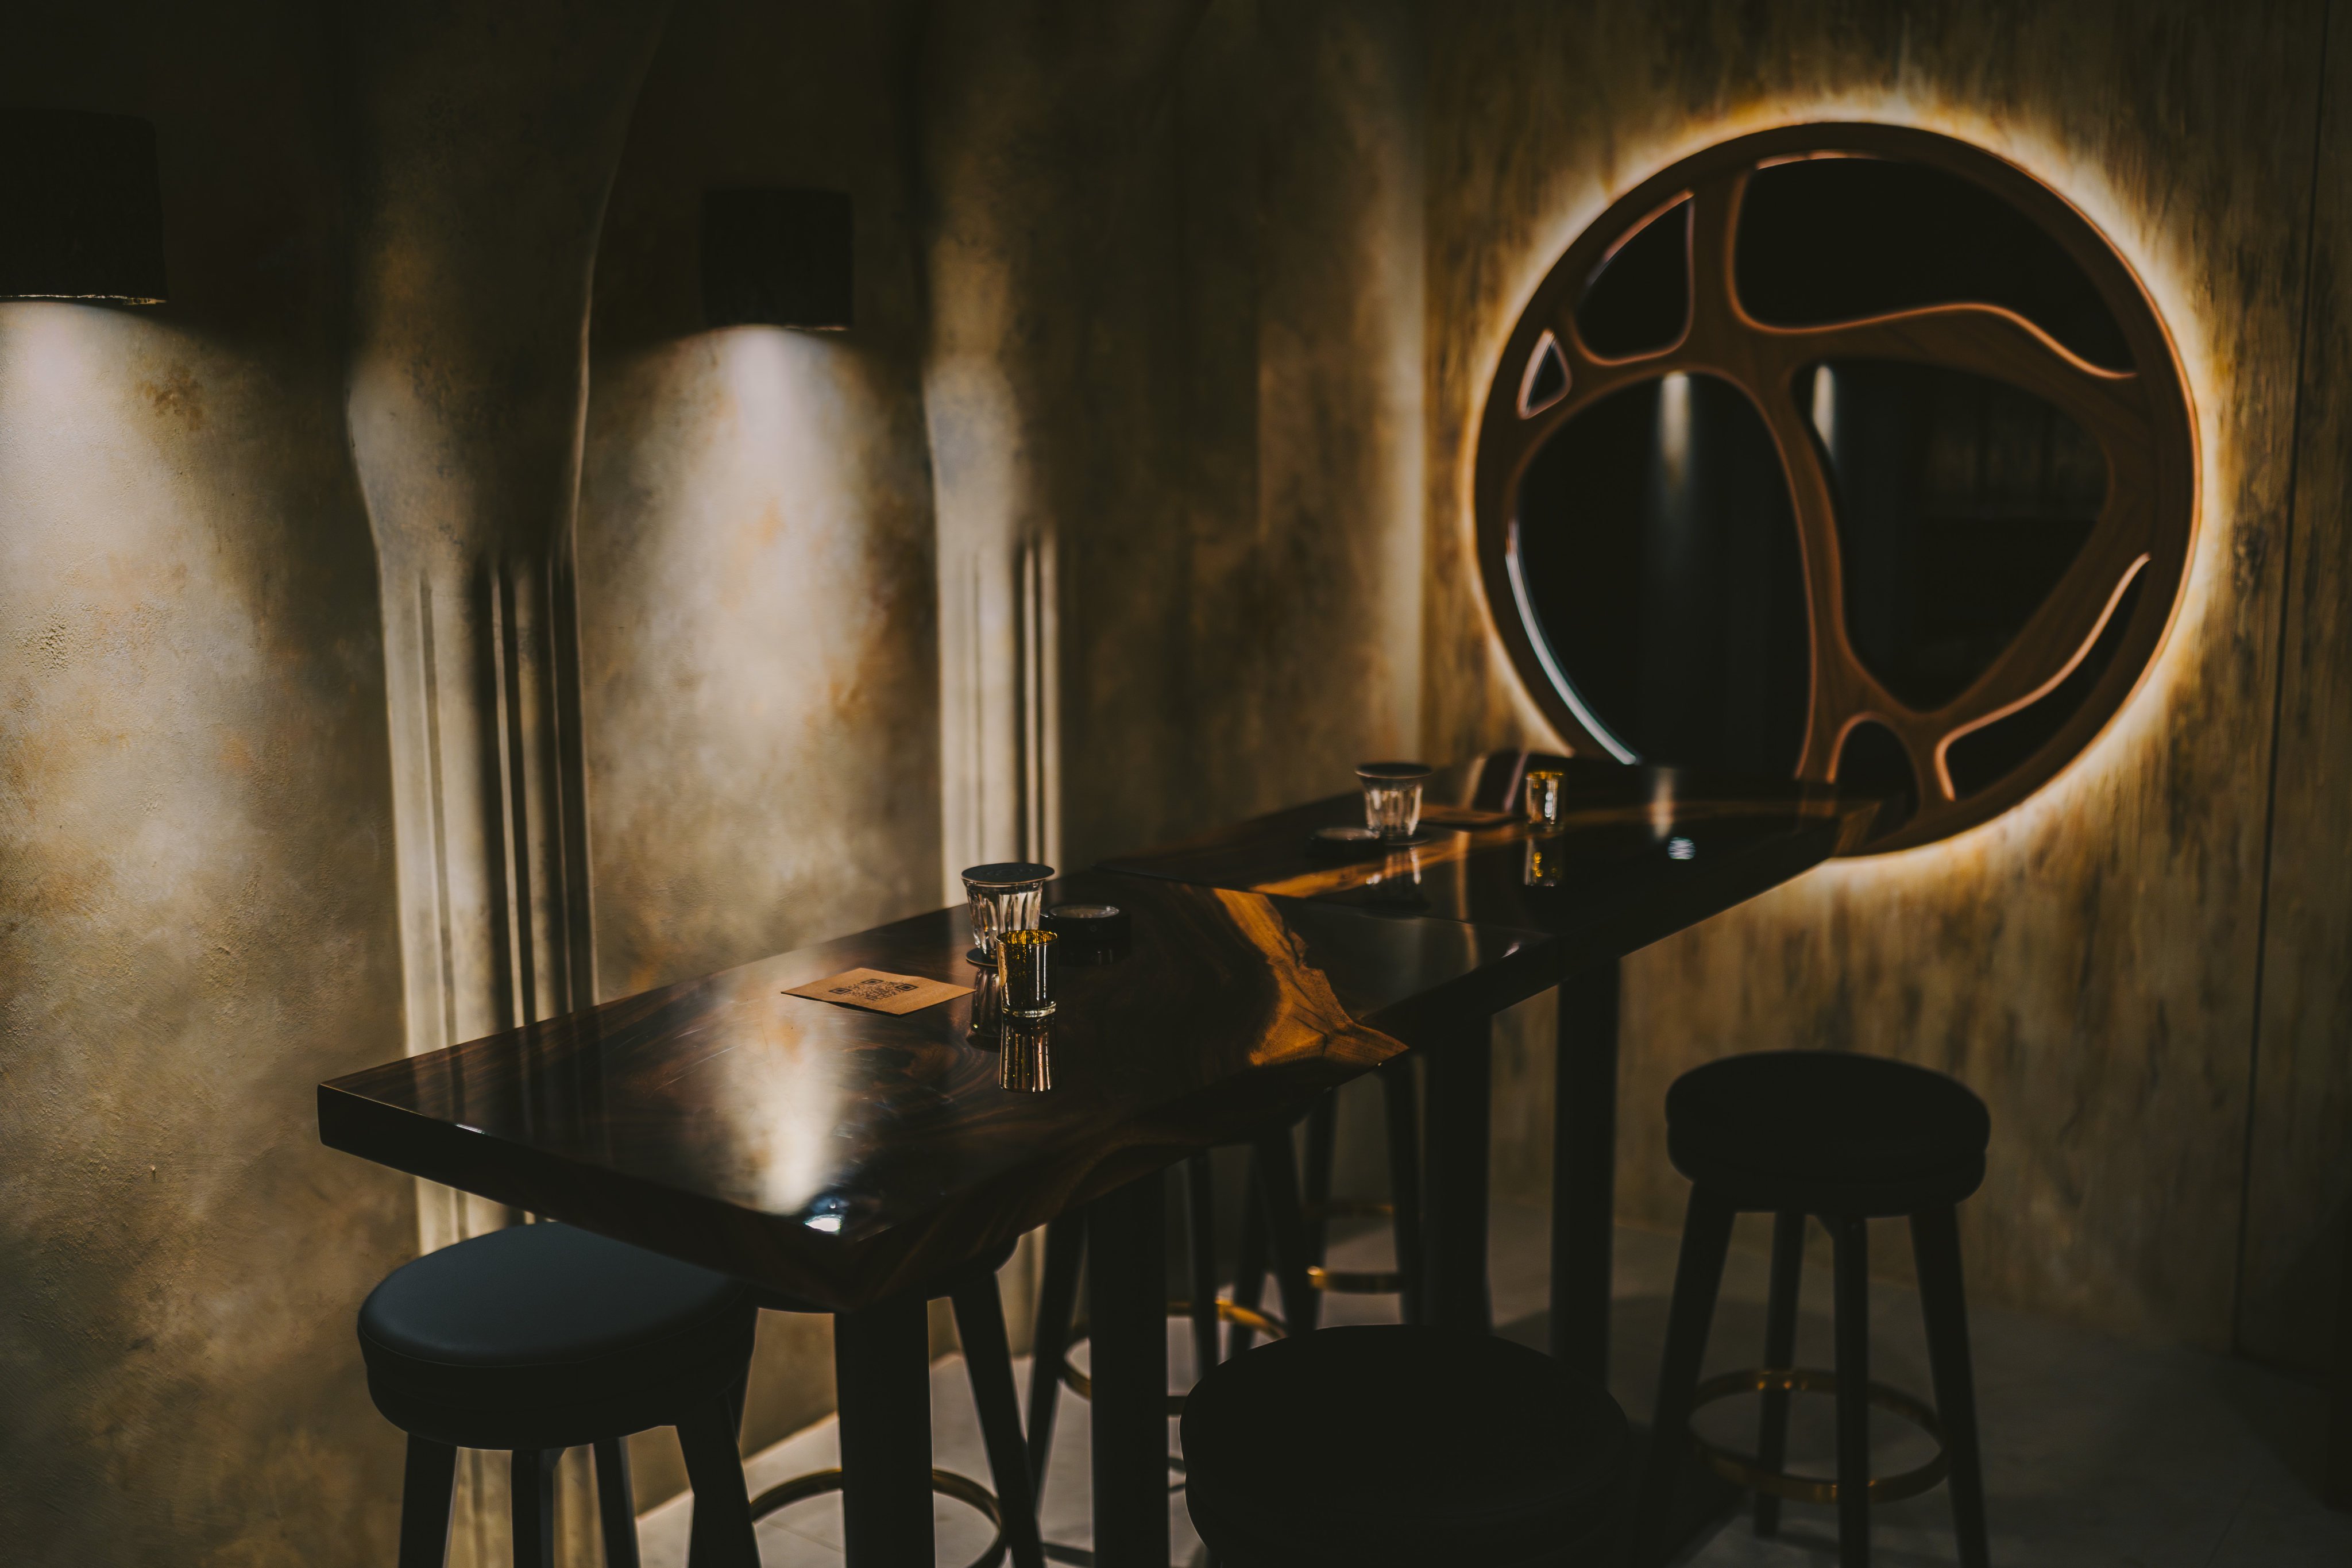 The atmospheric interior of Corsican Stars, a new hidden bar in Causeway Bay, Hong Kong. Once its soft opening phase ends, admission will be by invitation only. Seats are limited to 20, and the drinks have no name. Photo: Corsican Stars